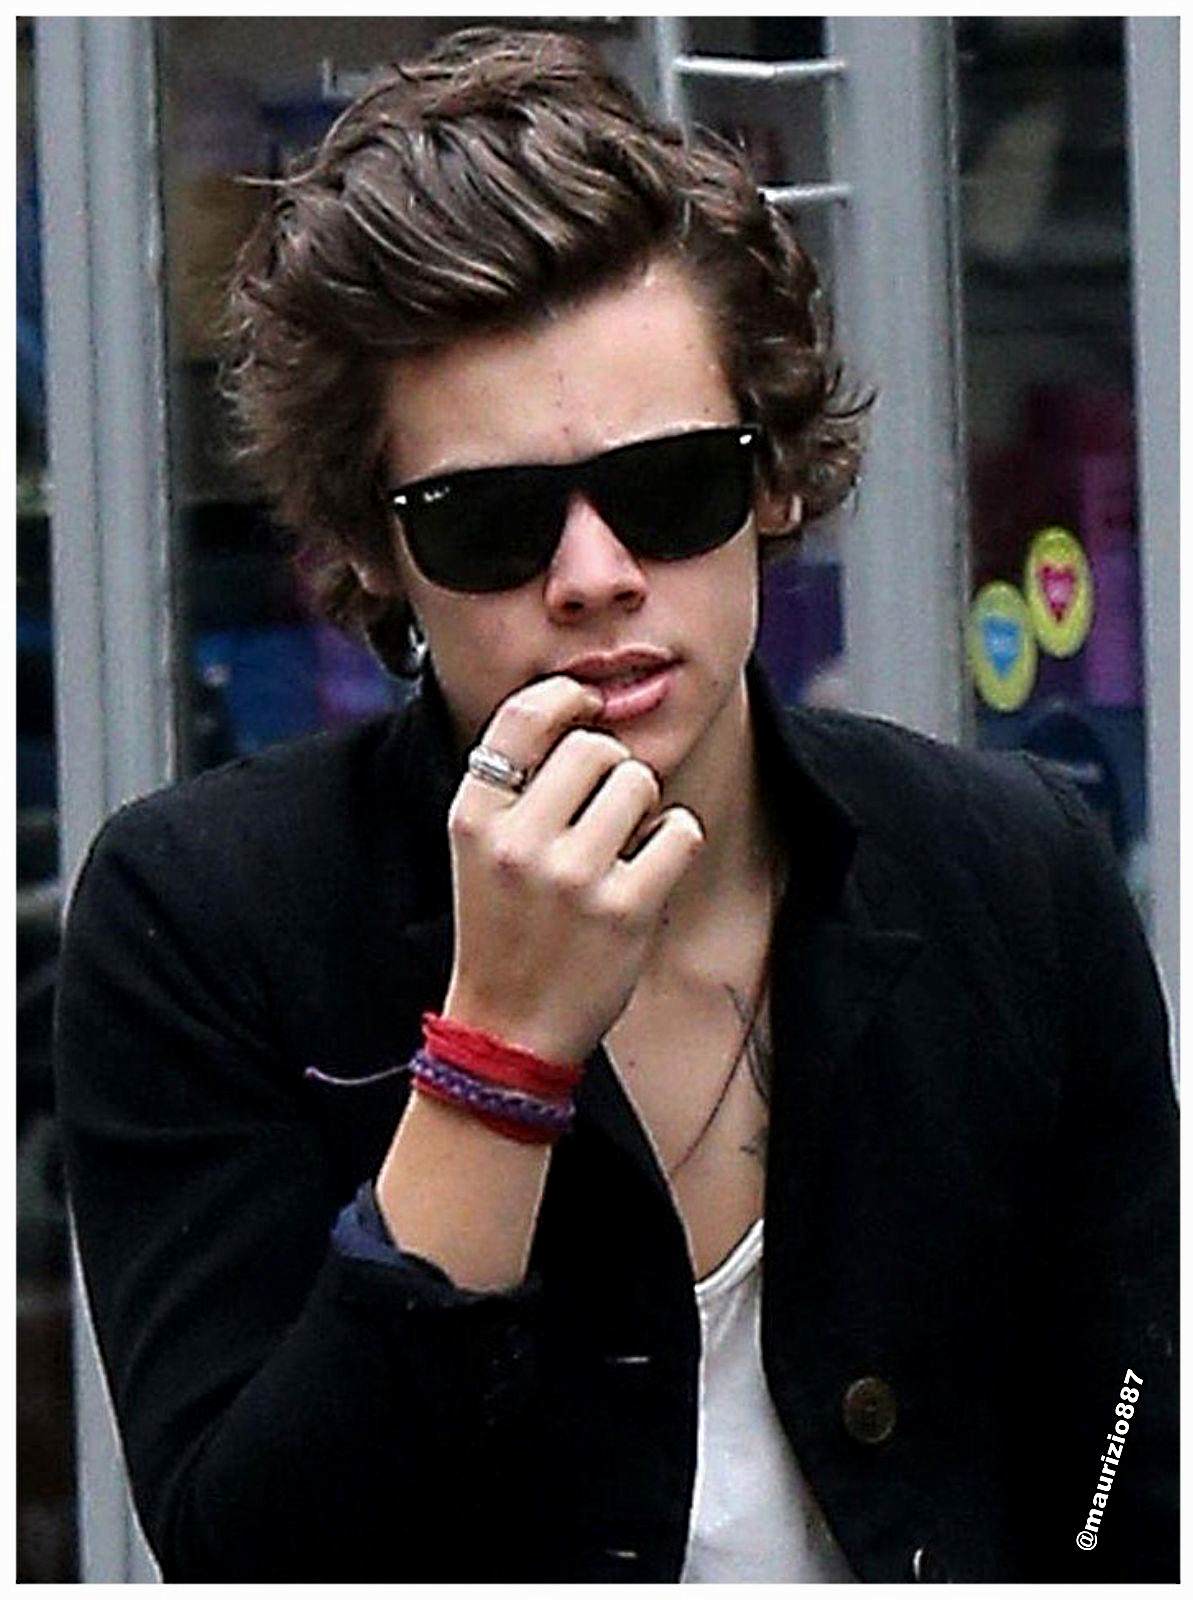 http://images6.fanpop.com/image/photos/34300000/Harry-styles-2013-one-direction-34365165-1193-1600.jpg